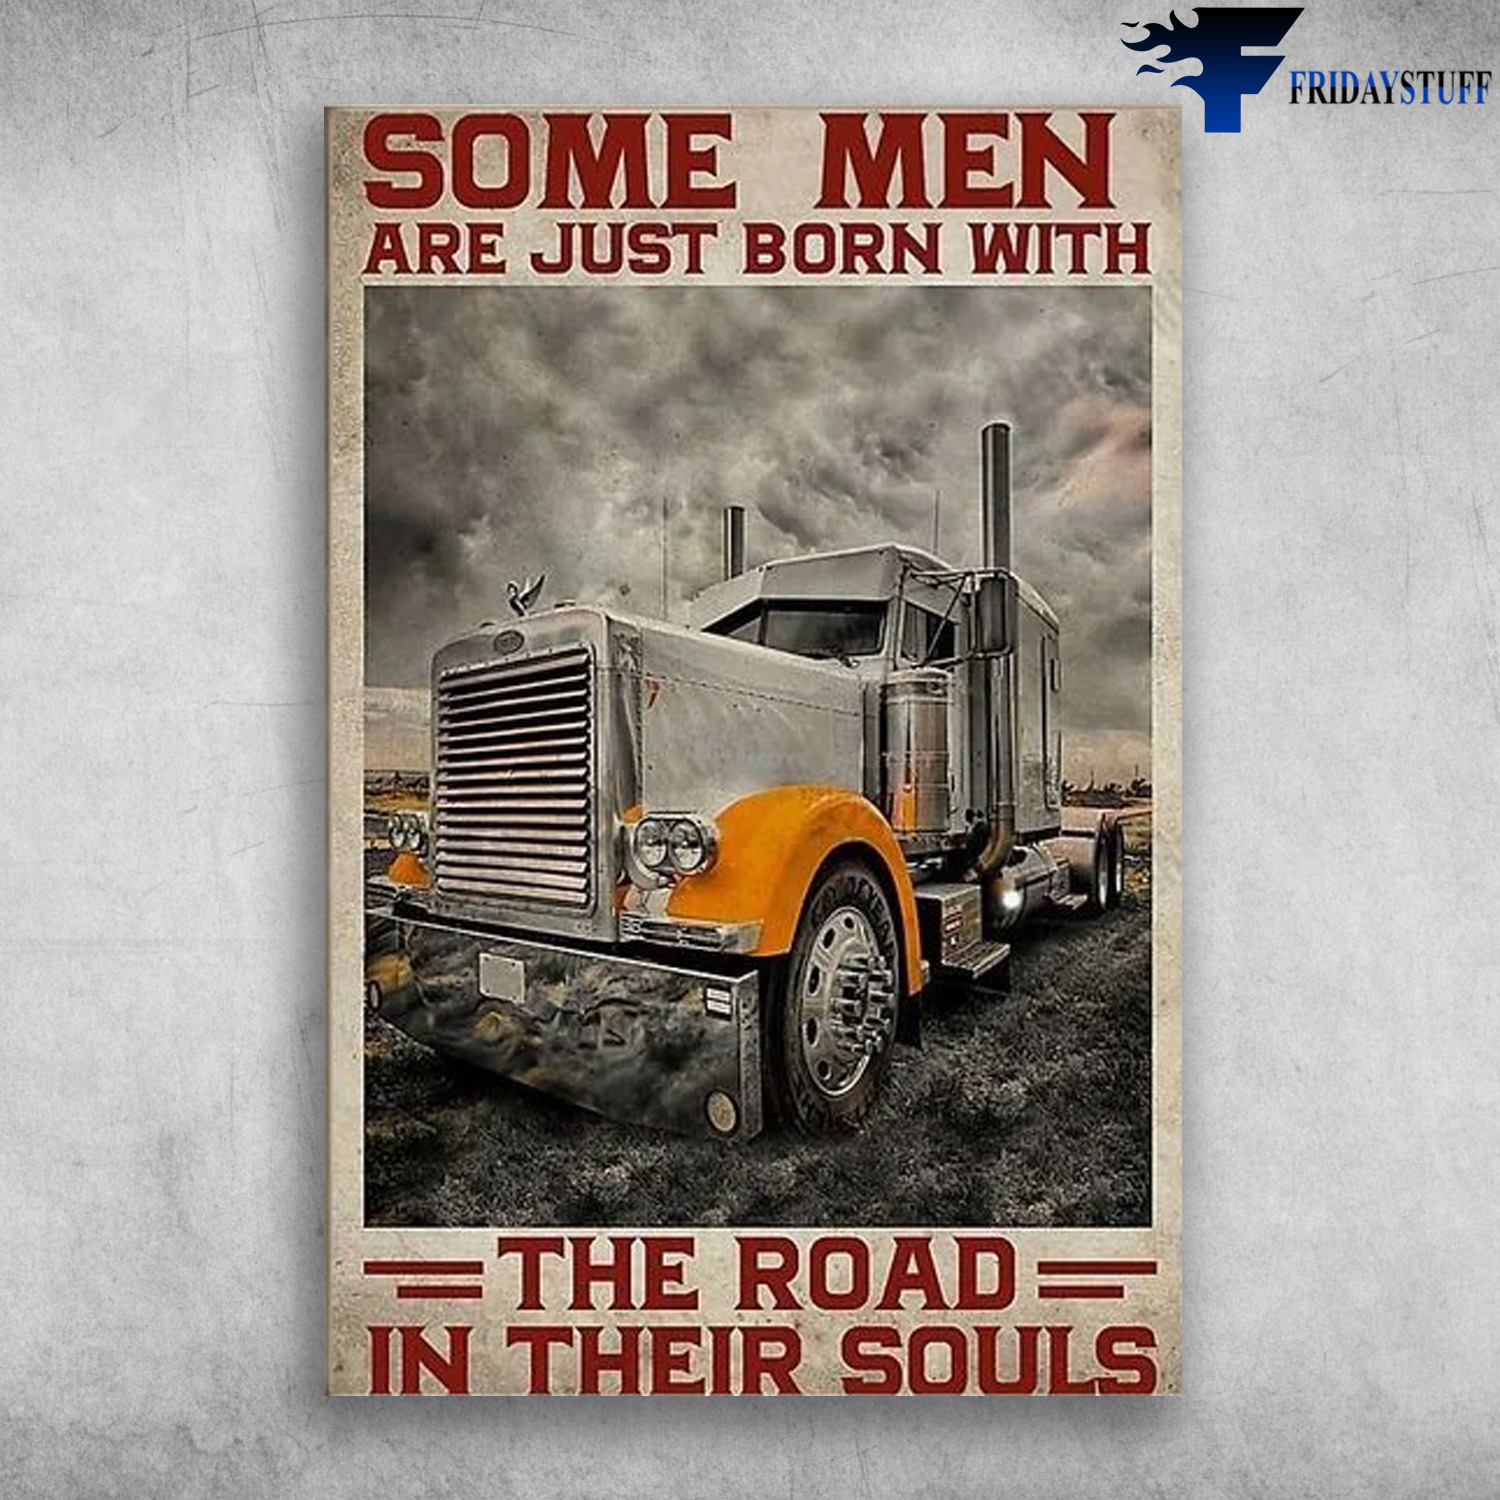 The Truck - Some Men Are Just Born With, The Road In Their Souls